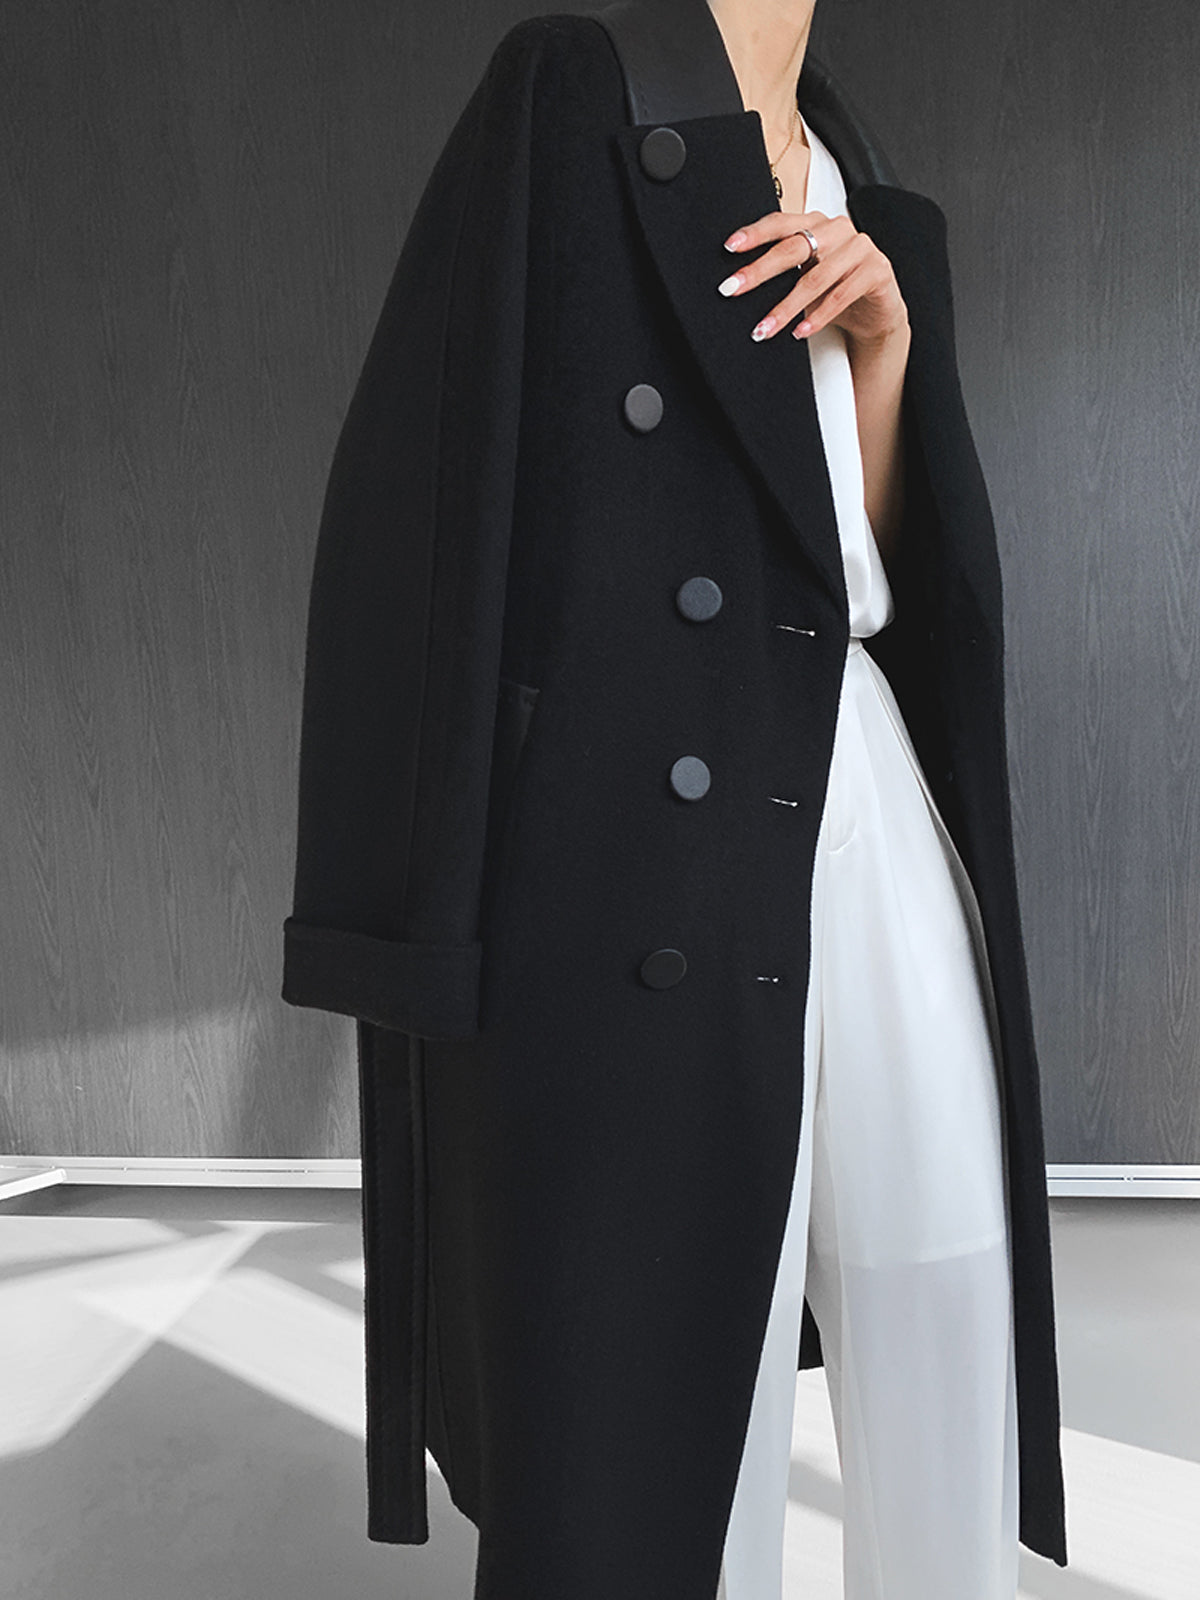 Signature Double Face Long Wrap Coat - OBSOLETES DO NOT TOUCH